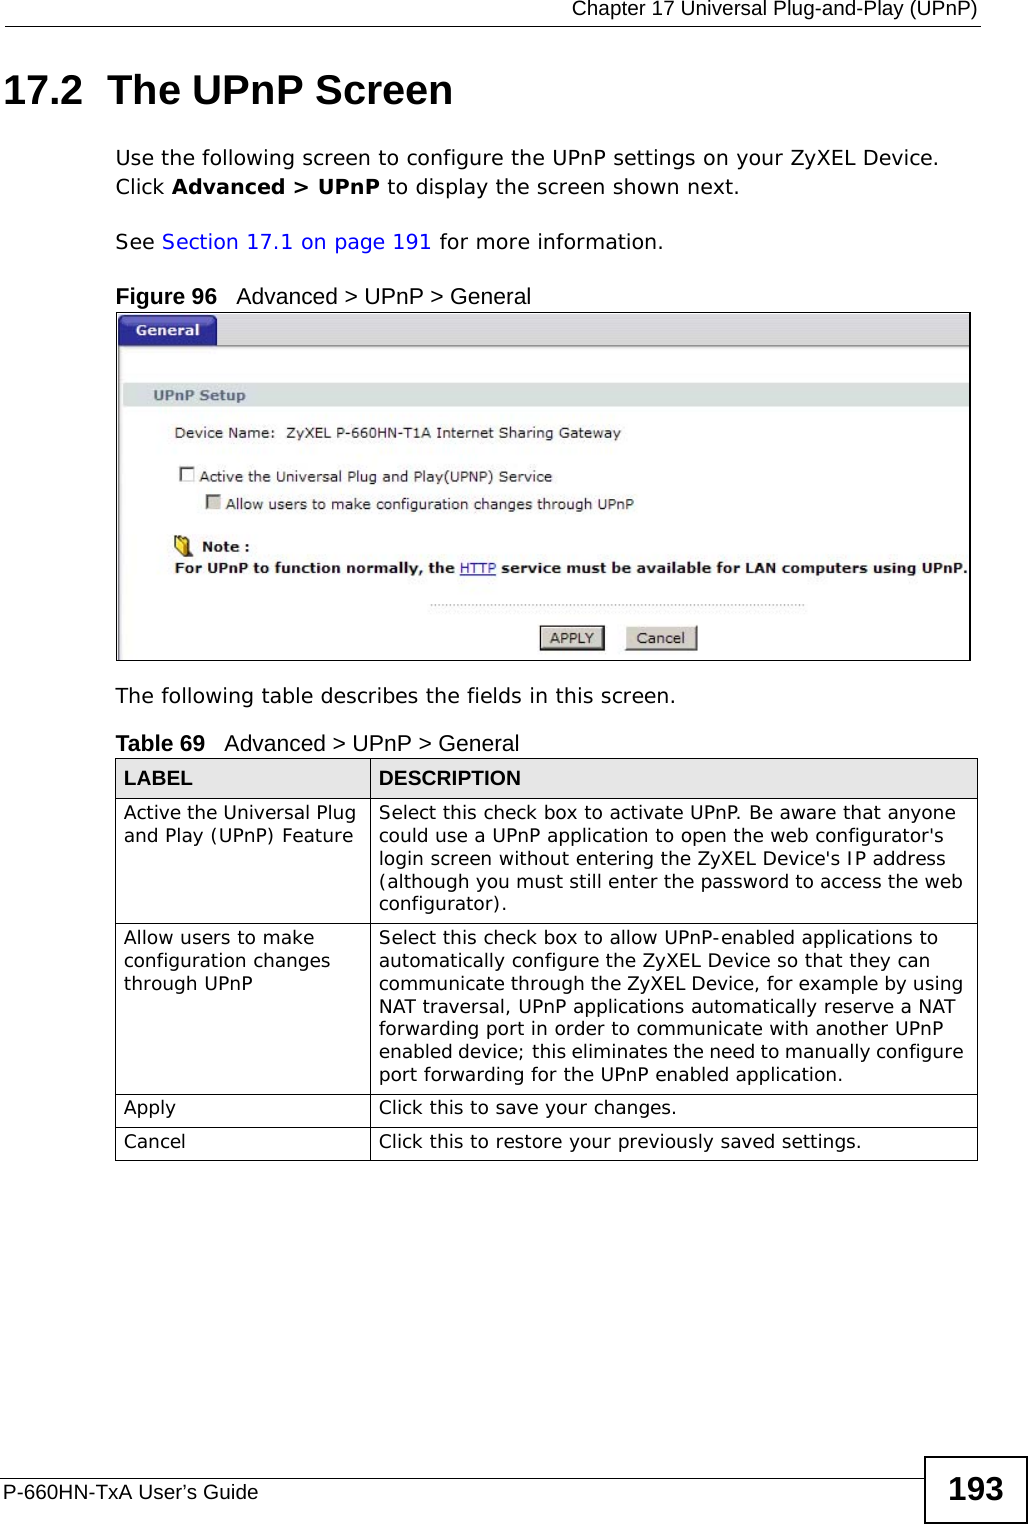  Chapter 17 Universal Plug-and-Play (UPnP)P-660HN-TxA User’s Guide 19317.2  The UPnP ScreenUse the following screen to configure the UPnP settings on your ZyXEL Device. Click Advanced &gt; UPnP to display the screen shown next.See Section 17.1 on page 191 for more information. Figure 96   Advanced &gt; UPnP &gt; GeneralThe following table describes the fields in this screen. Table 69   Advanced &gt; UPnP &gt; GeneralLABEL DESCRIPTIONActive the Universal Plug and Play (UPnP) Feature Select this check box to activate UPnP. Be aware that anyone could use a UPnP application to open the web configurator&apos;s login screen without entering the ZyXEL Device&apos;s IP address (although you must still enter the password to access the web configurator).Allow users to make configuration changes through UPnPSelect this check box to allow UPnP-enabled applications to automatically configure the ZyXEL Device so that they can communicate through the ZyXEL Device, for example by using NAT traversal, UPnP applications automatically reserve a NAT forwarding port in order to communicate with another UPnP enabled device; this eliminates the need to manually configure port forwarding for the UPnP enabled application. Apply Click this to save your changes.Cancel Click this to restore your previously saved settings.